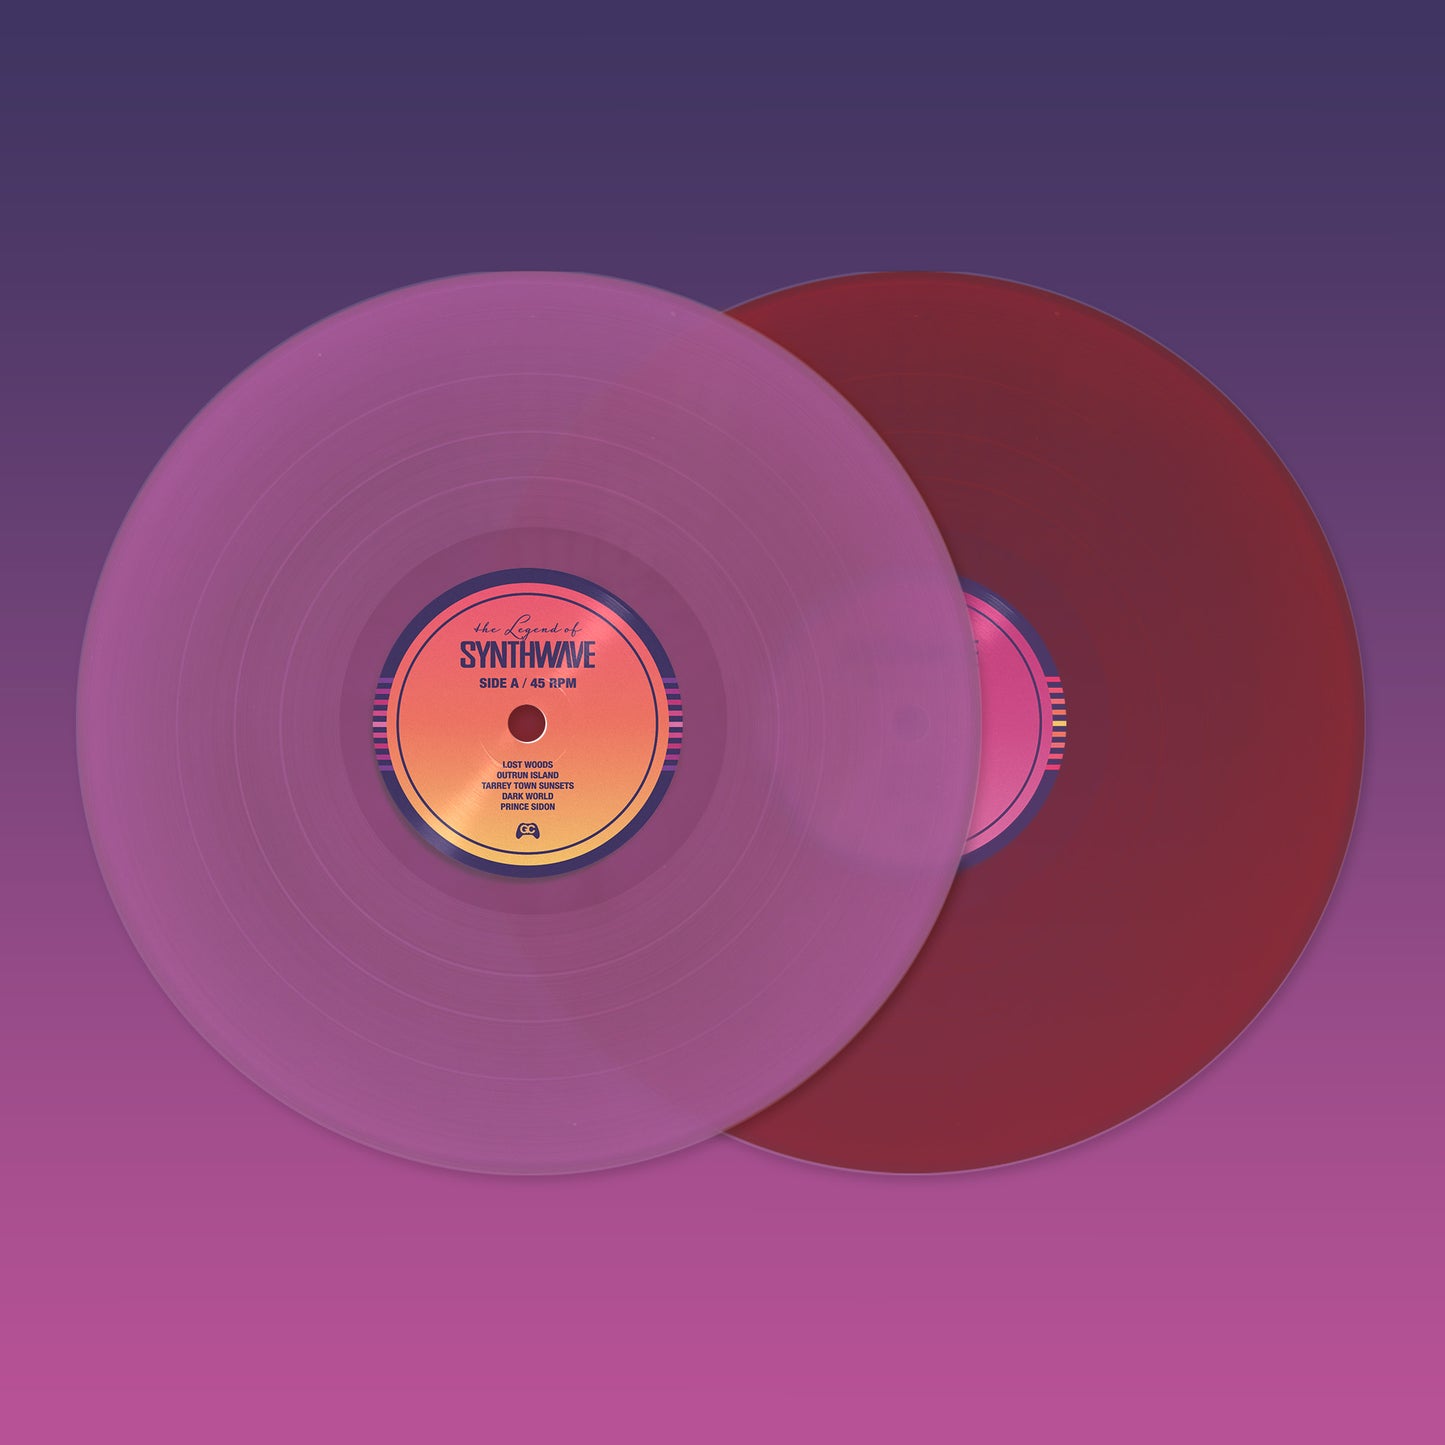 Legend of Synthwave Deluxe Double Vinyl Record